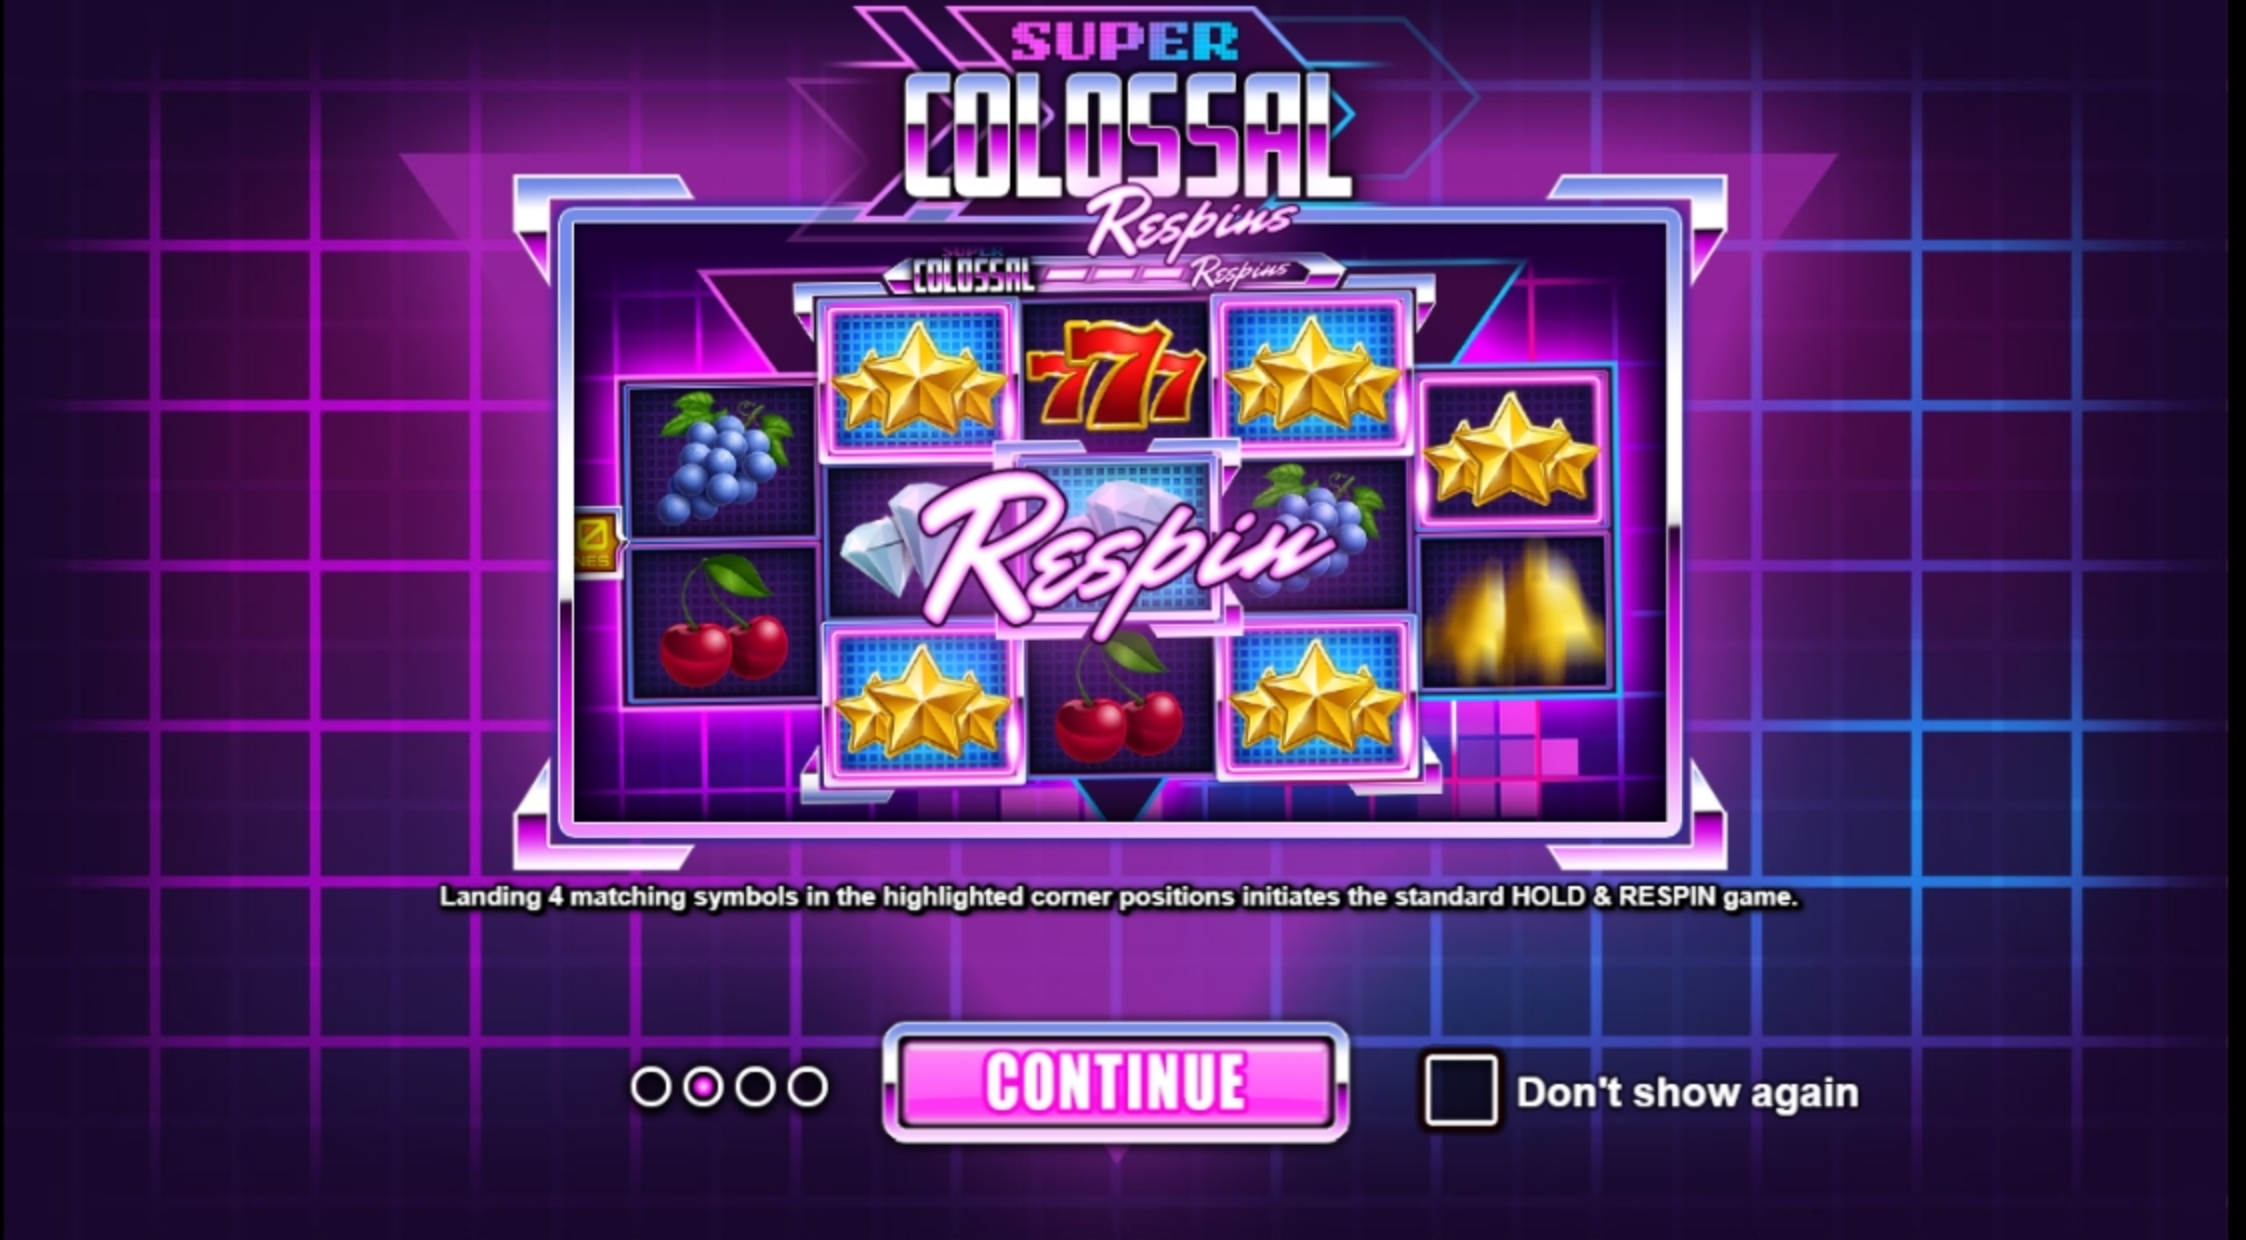 Play Super Colossal Respins Free Casino Slot Game by Games Inc